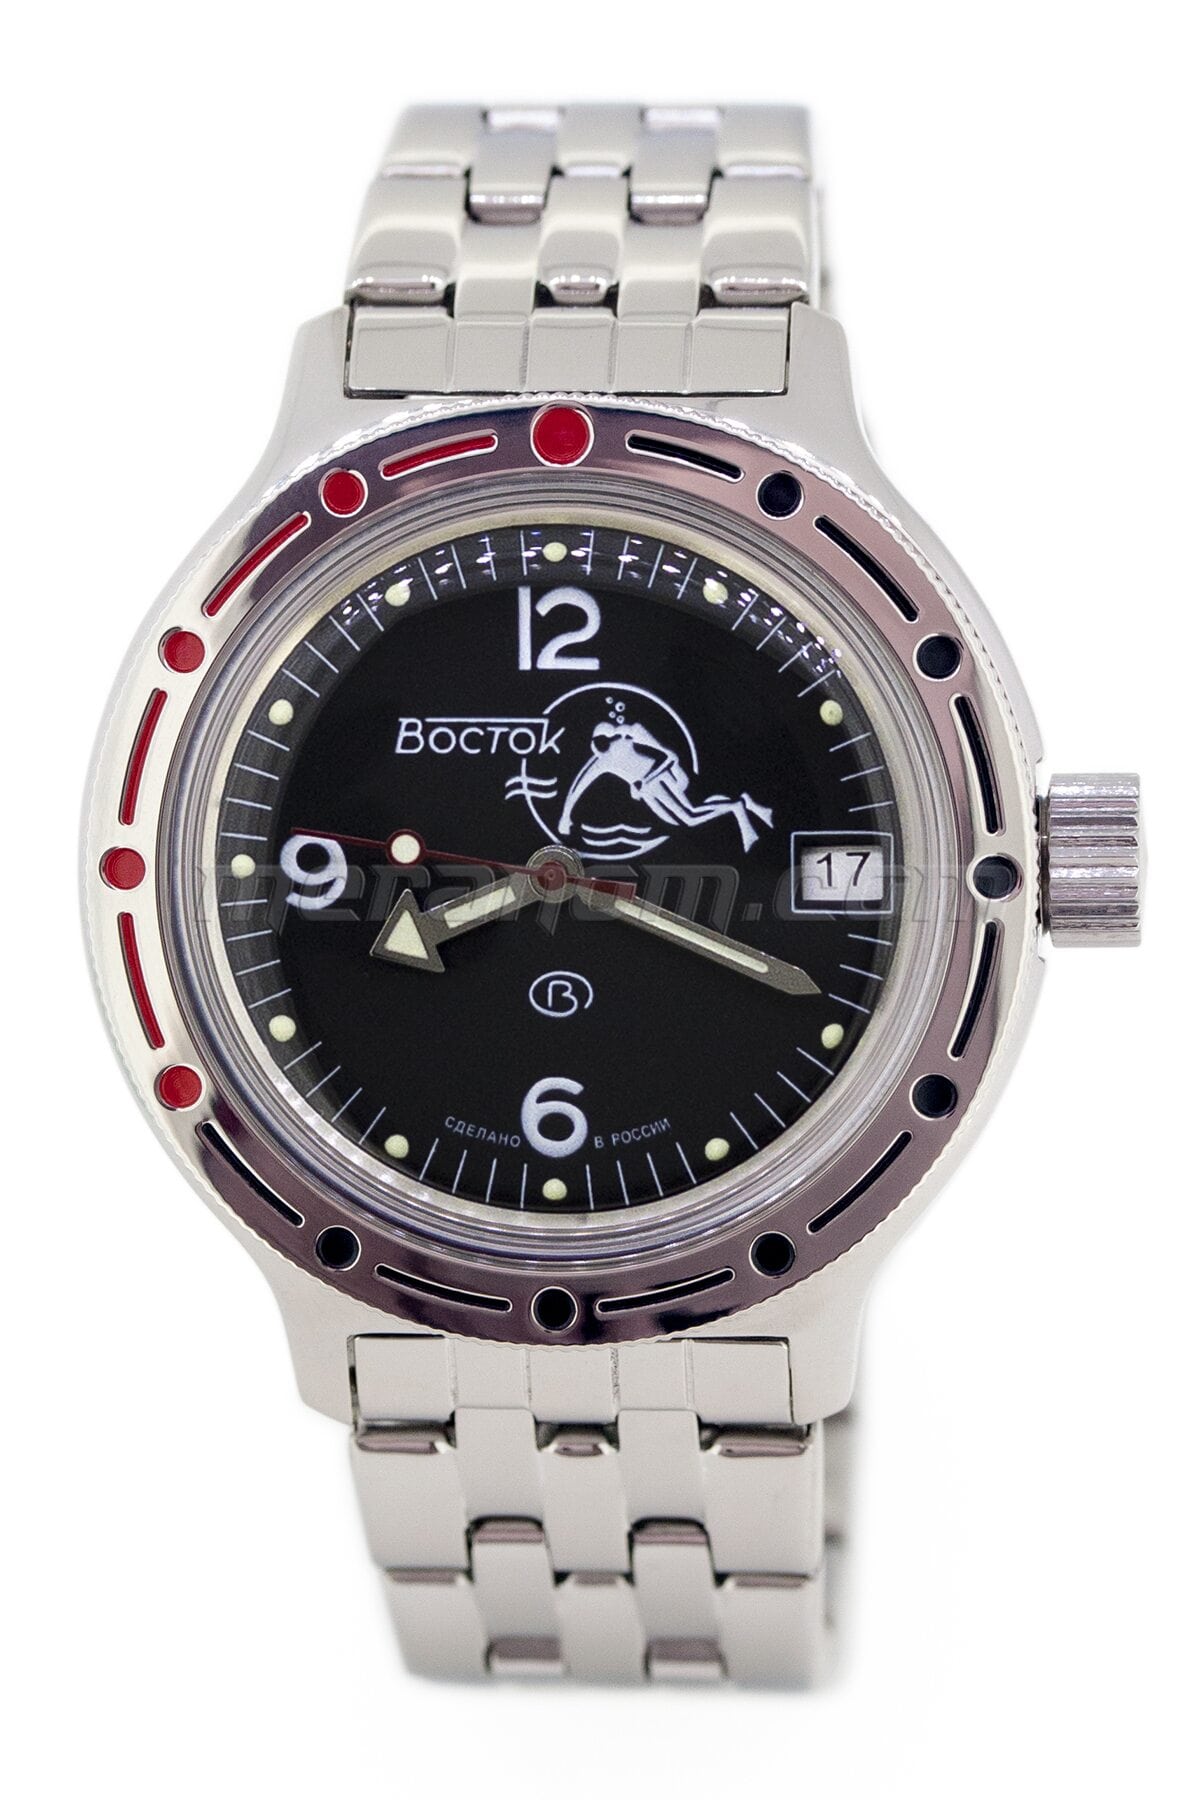 This $100 Vostok Amphibia is a Panerai killer! Best value for money PAM  like watch in 2021. - YouTube